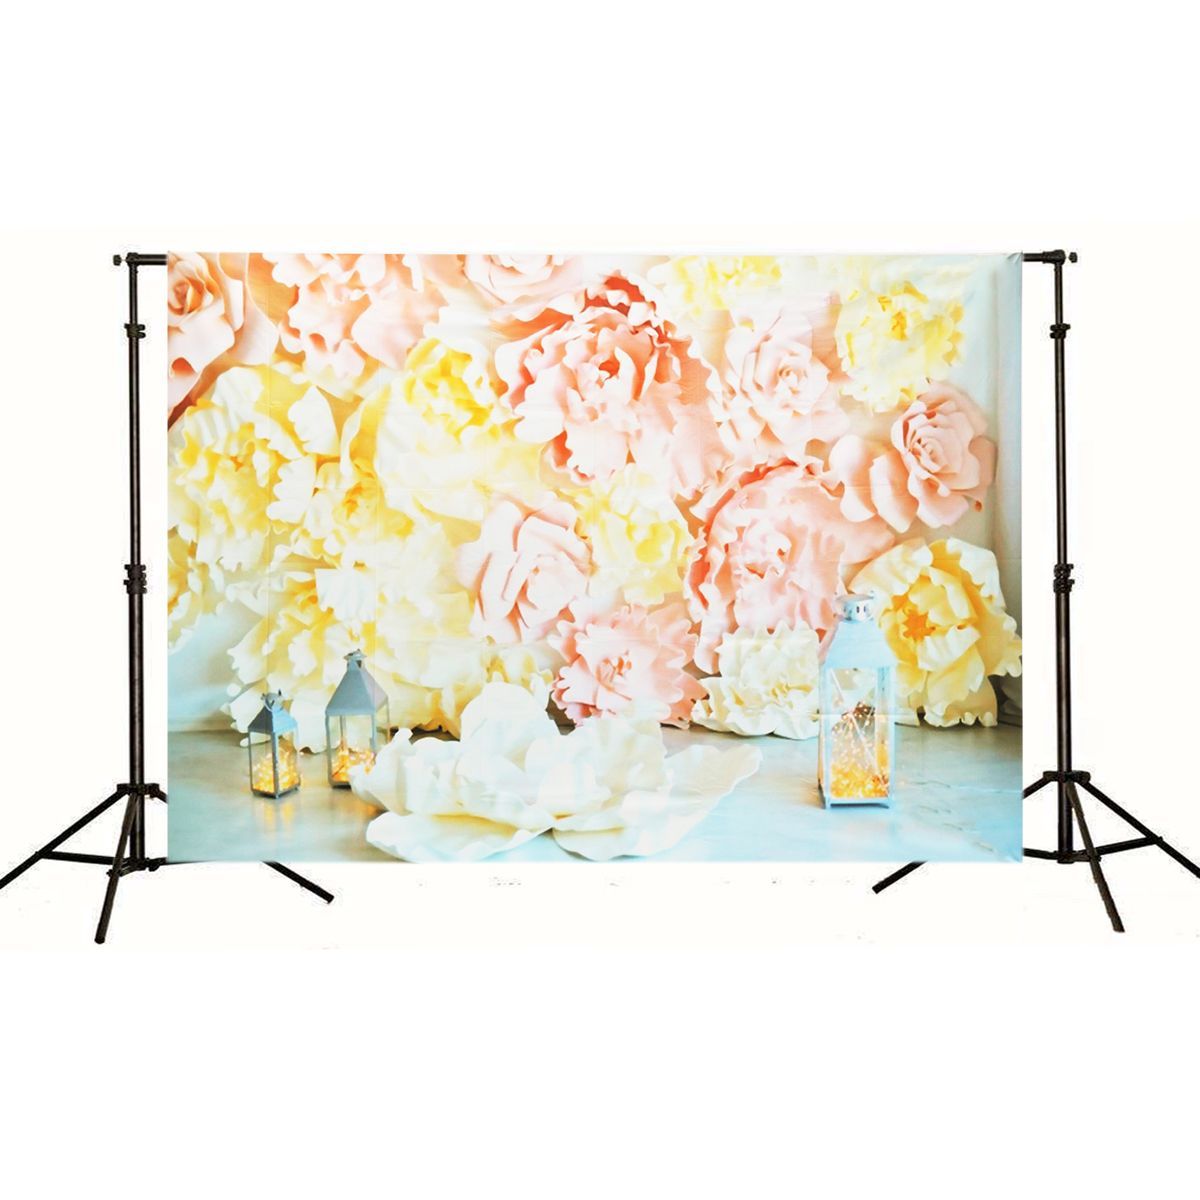 7x5ft-3D-Balloon-Niches-Colourful-Flower-Thin-Vinyl-Photography-Backdrop-Background-Studio-Prop-1306064